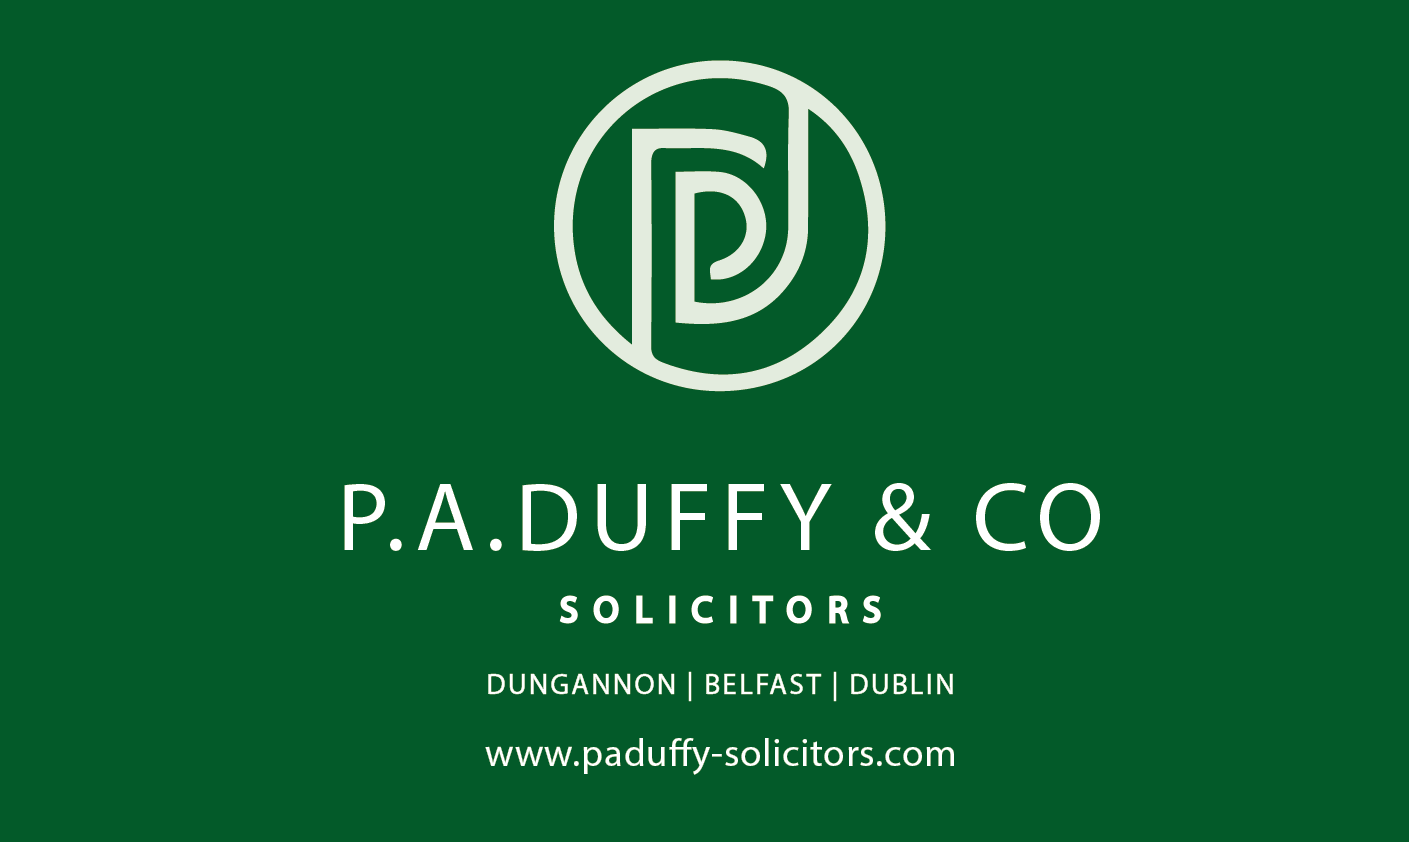 Image for P.A. Duffy & Co Solicitors